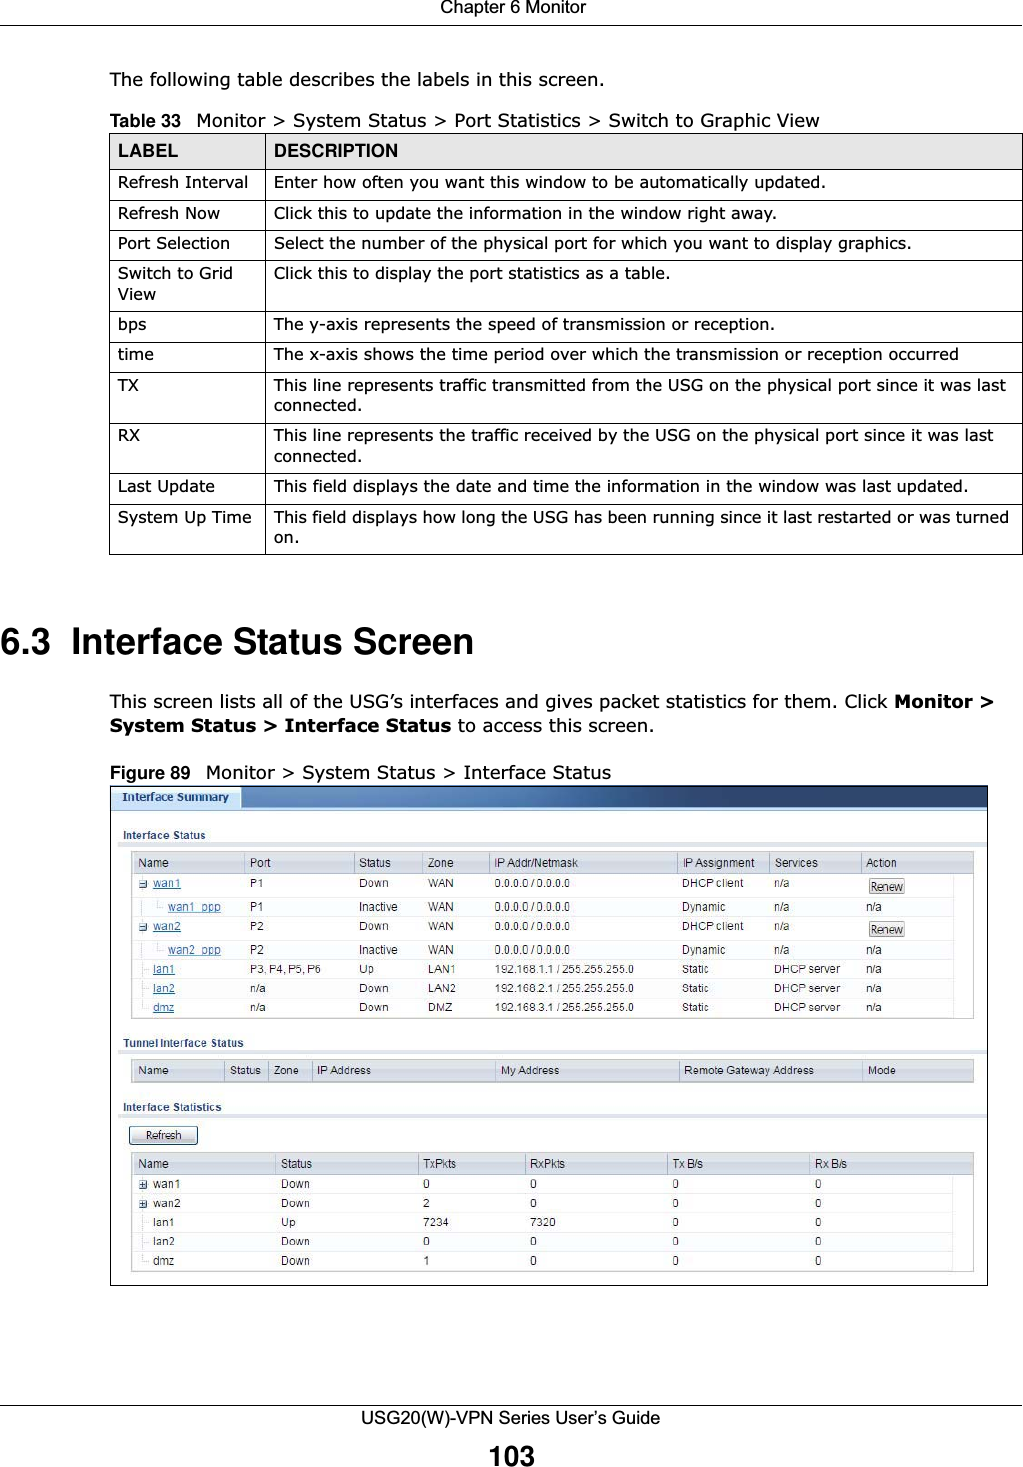  Chapter 6 MonitorUSG20(W)-VPN Series User’s Guide103The following table describes the labels in this screen. 6.3  Interface Status ScreenThis screen lists all of the USG’s interfaces and gives packet statistics for them. Click Monitor &gt; System Status &gt; Interface Status to access this screen.Figure 89   Monitor &gt; System Status &gt; Interface Status Table 33   Monitor &gt; System Status &gt; Port Statistics &gt; Switch to Graphic ViewLABEL DESCRIPTIONRefresh Interval Enter how often you want this window to be automatically updated.Refresh Now Click this to update the information in the window right away. Port Selection Select the number of the physical port for which you want to display graphics.Switch to Grid ViewClick this to display the port statistics as a table.bps The y-axis represents the speed of transmission or reception.time The x-axis shows the time period over which the transmission or reception occurredTX This line represents traffic transmitted from the USG on the physical port since it was last connected.RX This line represents the traffic received by the USG on the physical port since it was last connected.Last Update This field displays the date and time the information in the window was last updated. System Up Time This field displays how long the USG has been running since it last restarted or was turned on.